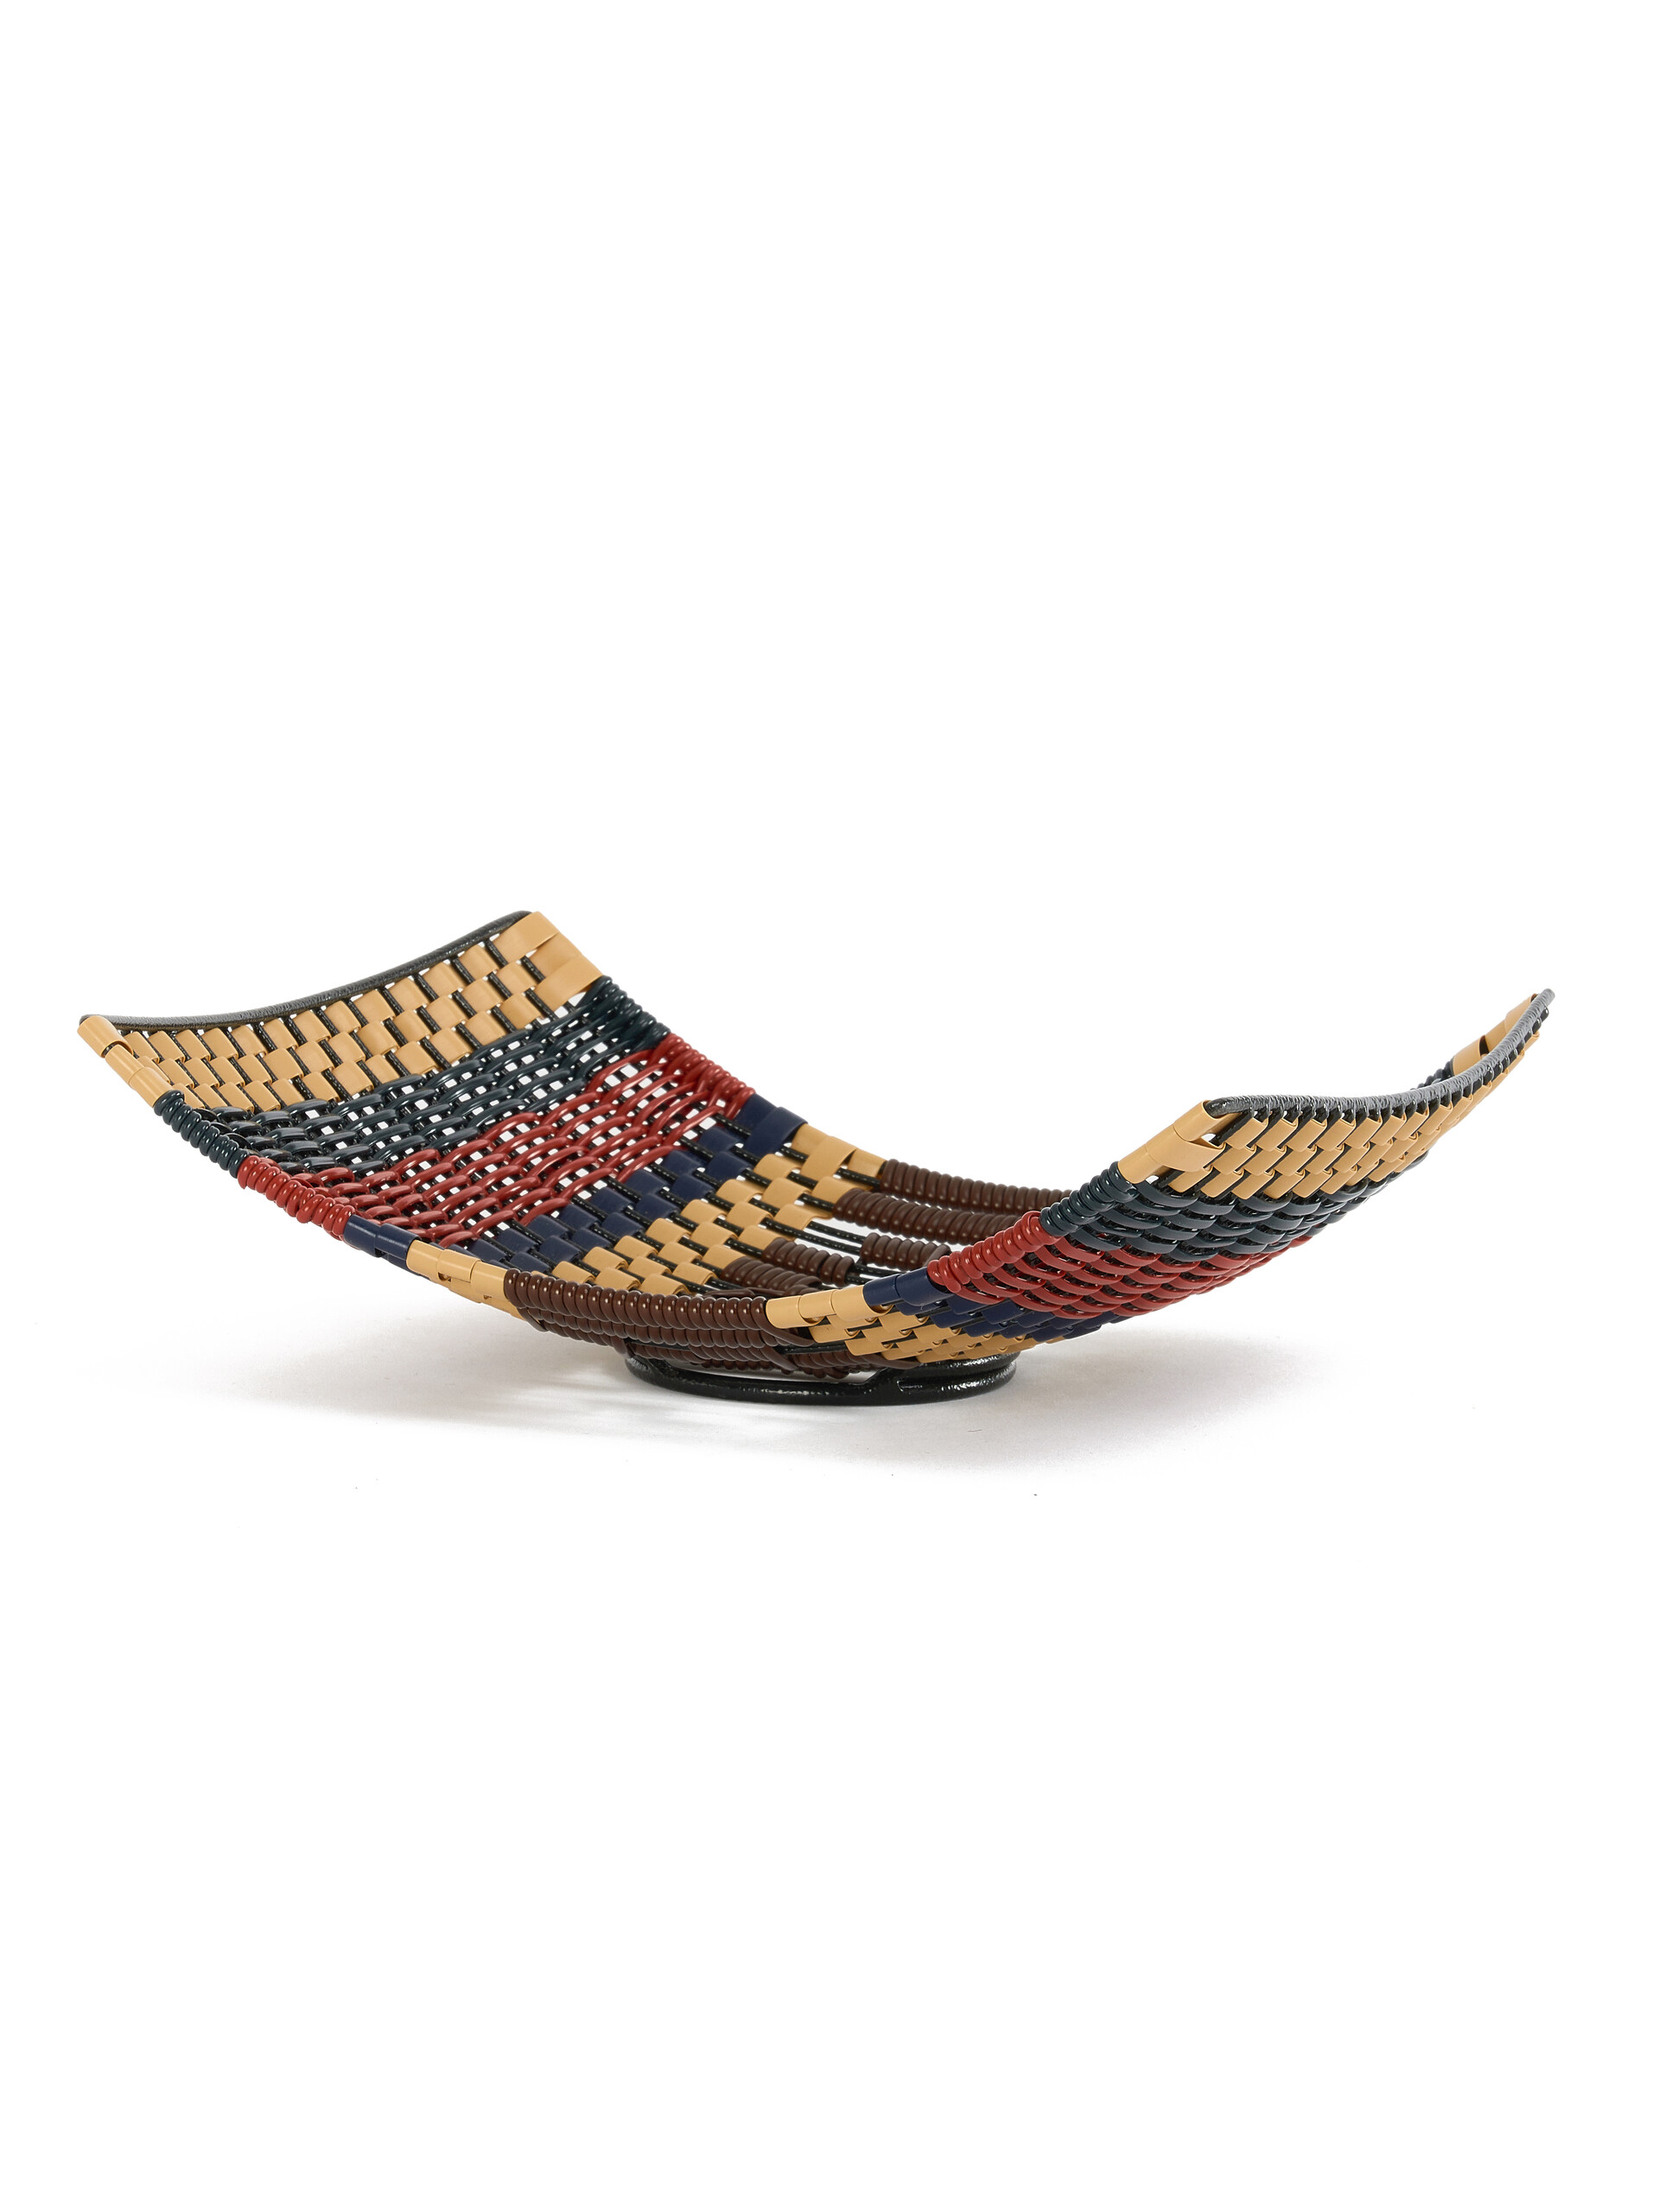 Blue and red Marni Market woven curved tray - Furniture - Image 3